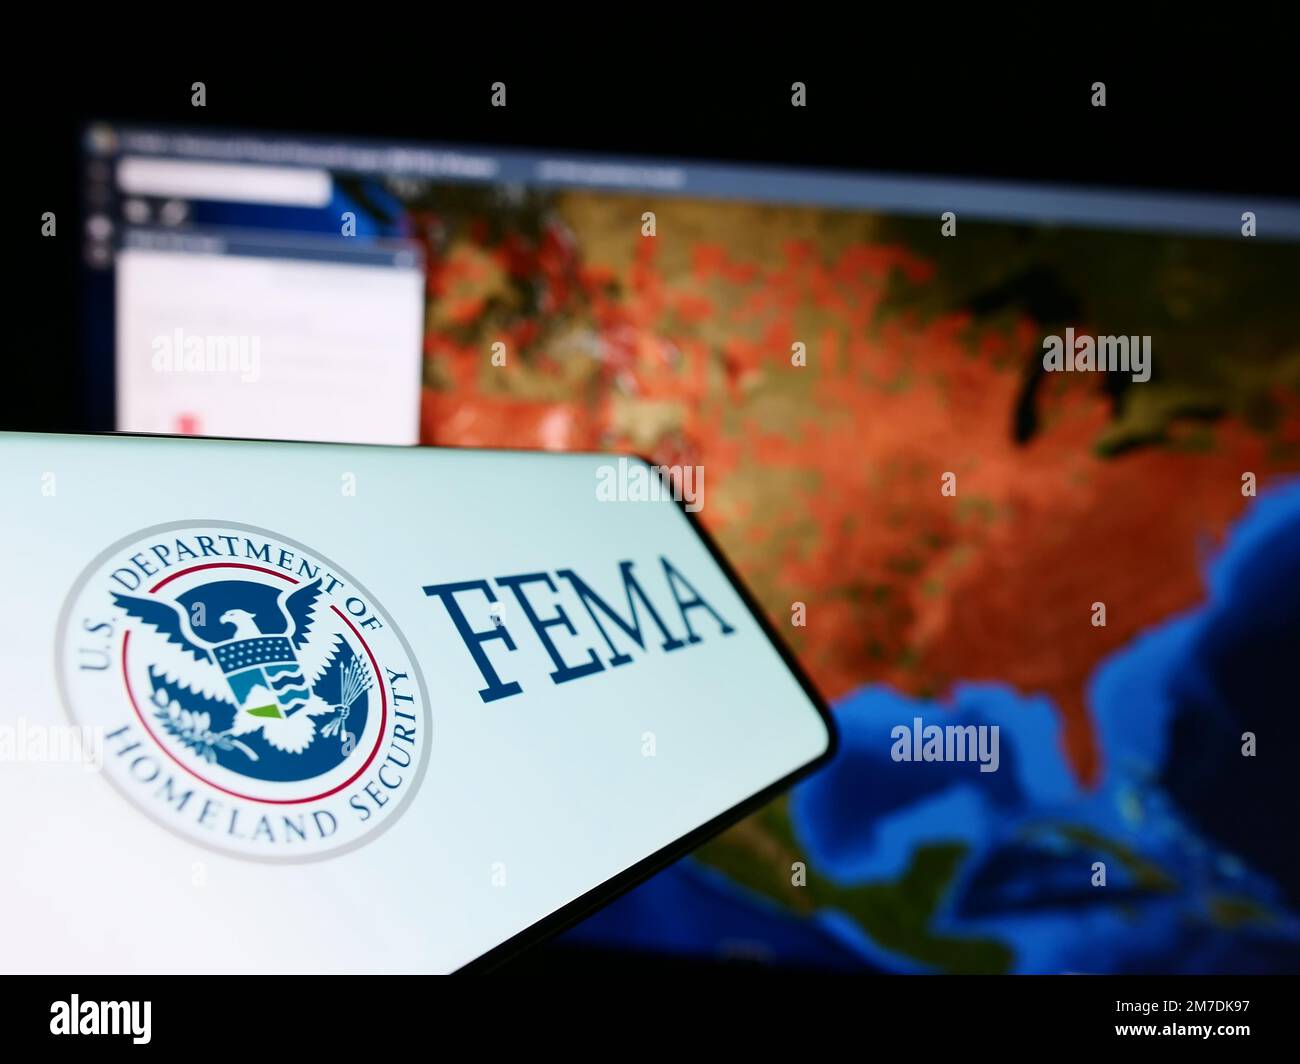 Mobile phone with seal of Federal Emergency Management Agency (FEMA) on screen in front of website. Focus on center-left of phone display. Stock Photo